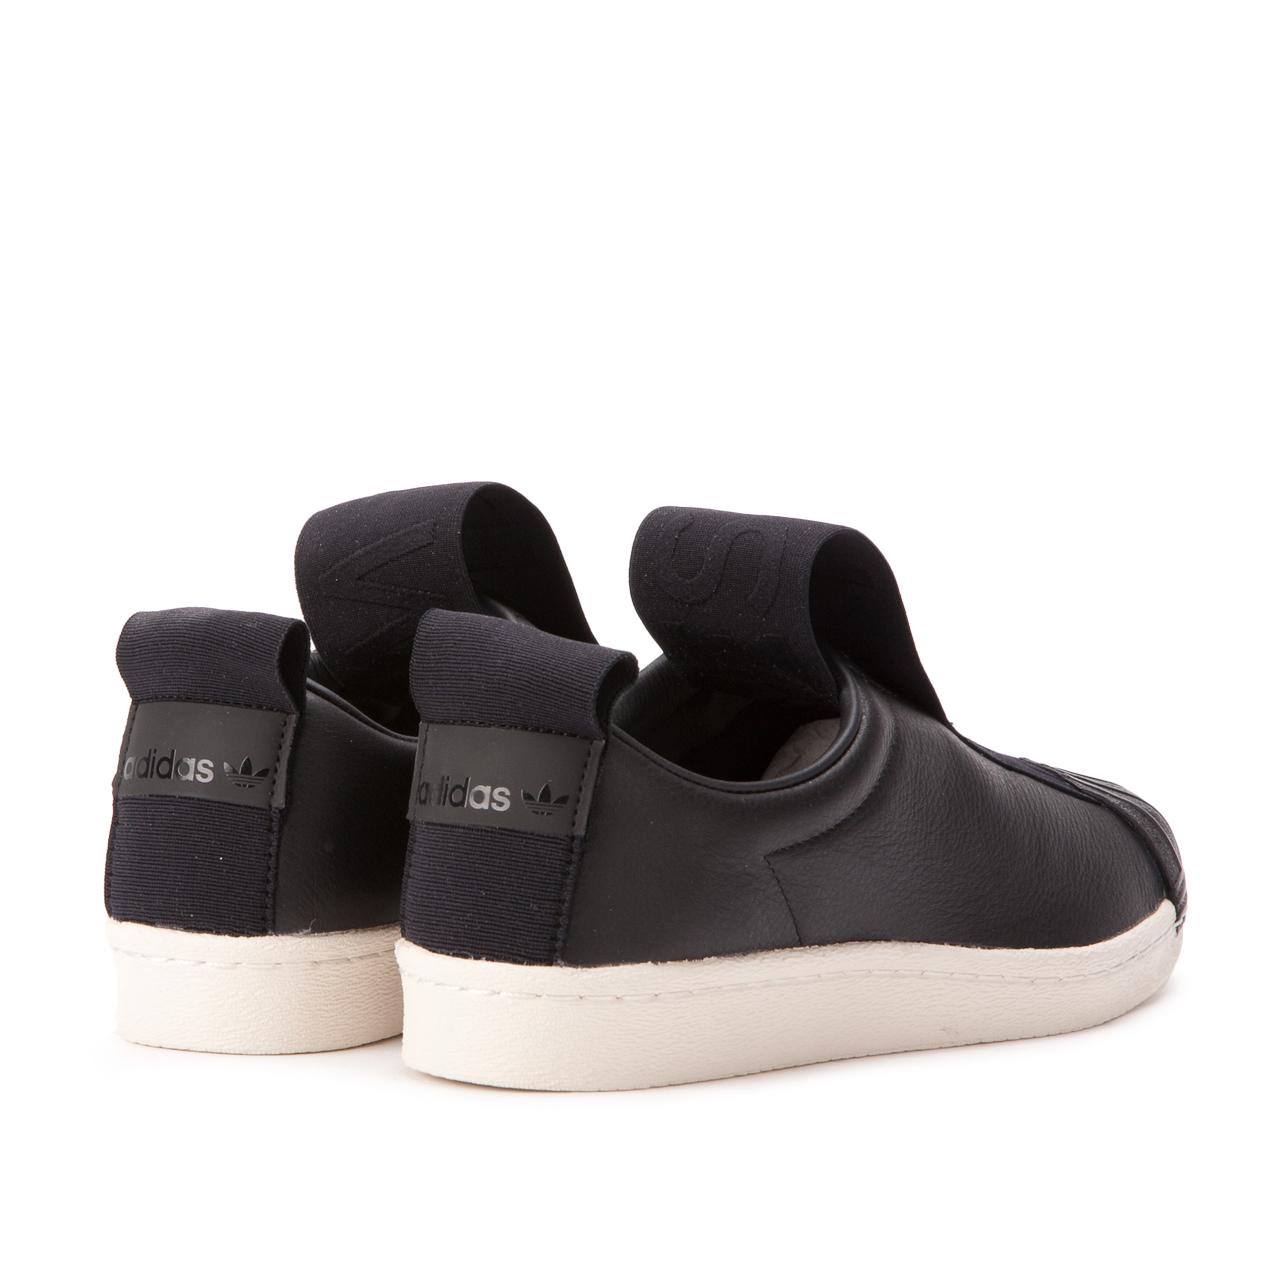 adidas Leather Superstar Bw3s Slip On in Black for Men - Lyst